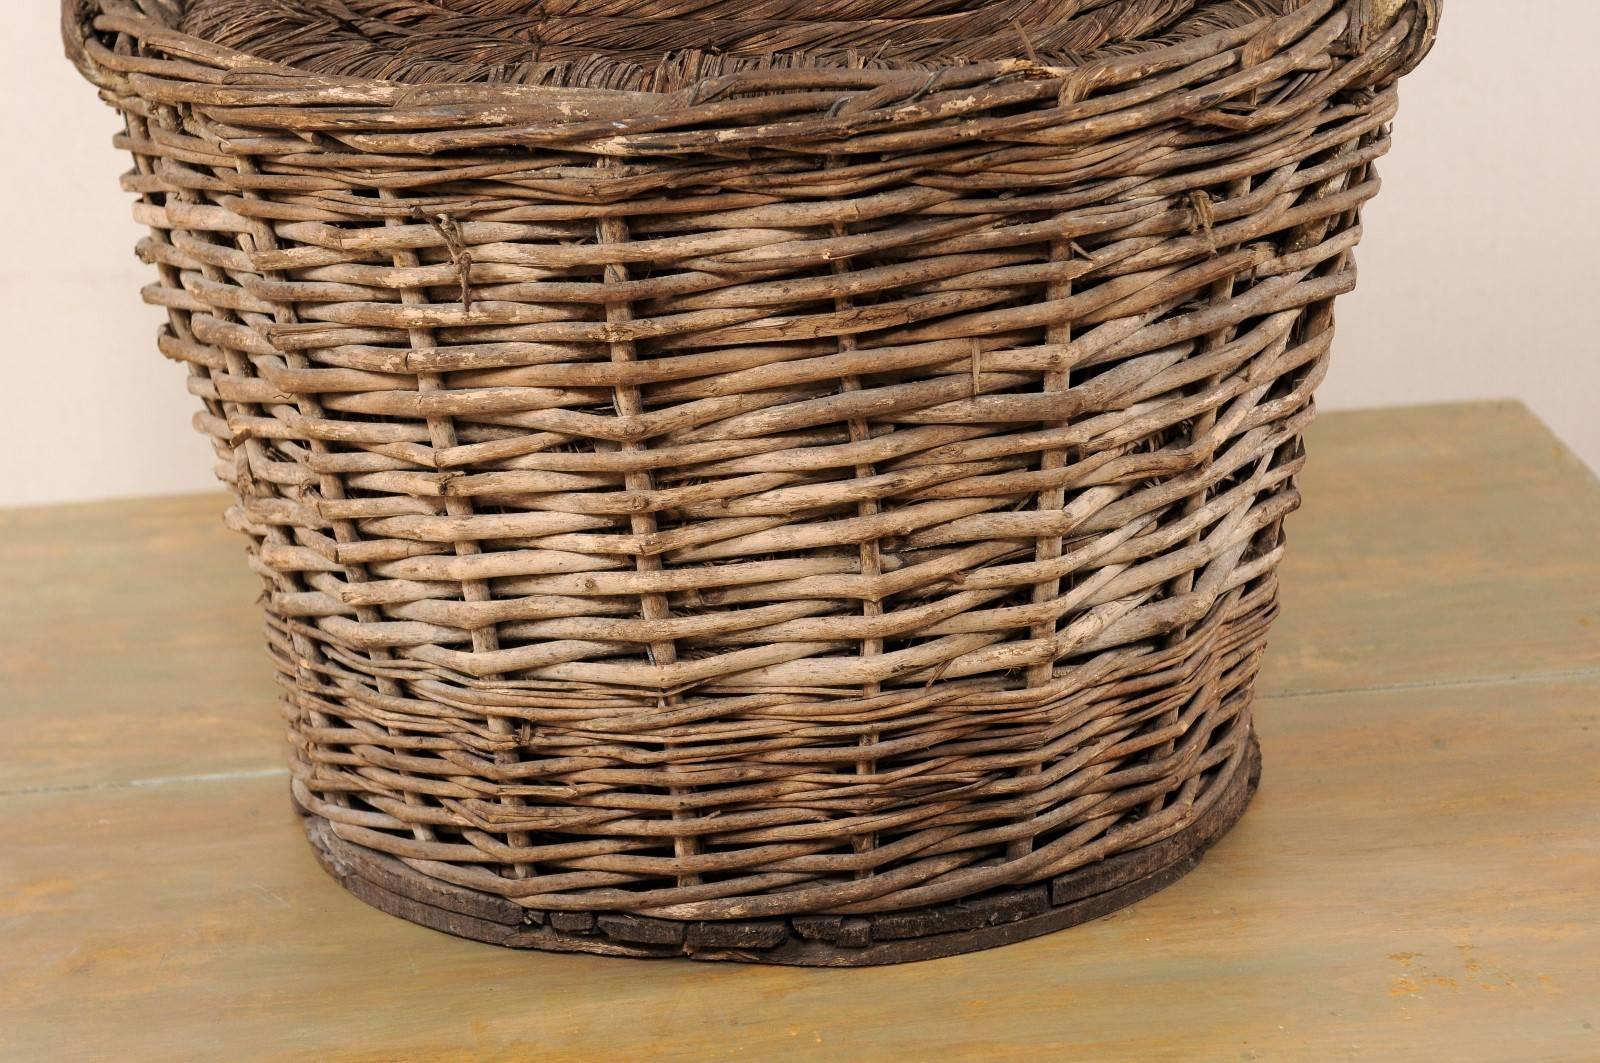 20th Century French Mid-Century Handwoven Basket with a Large Demijohn Glass Wine Bottle